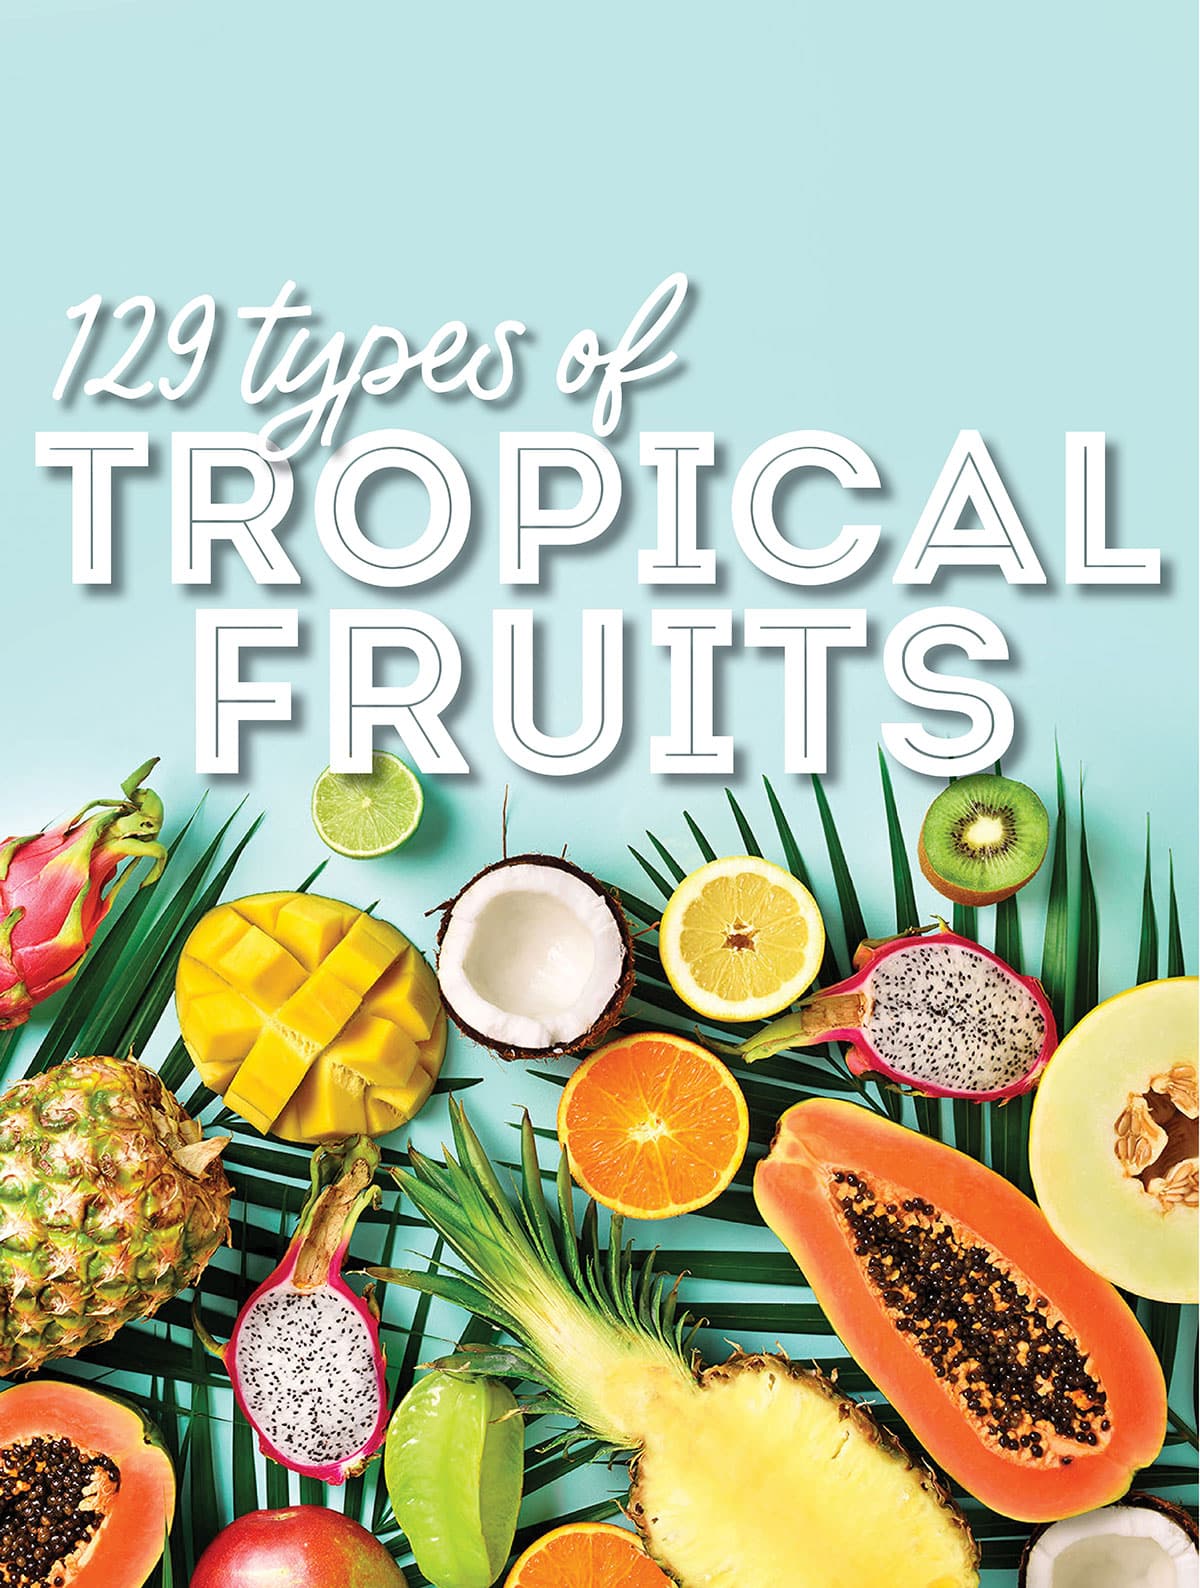 Collage that says "types of tropical fruits"